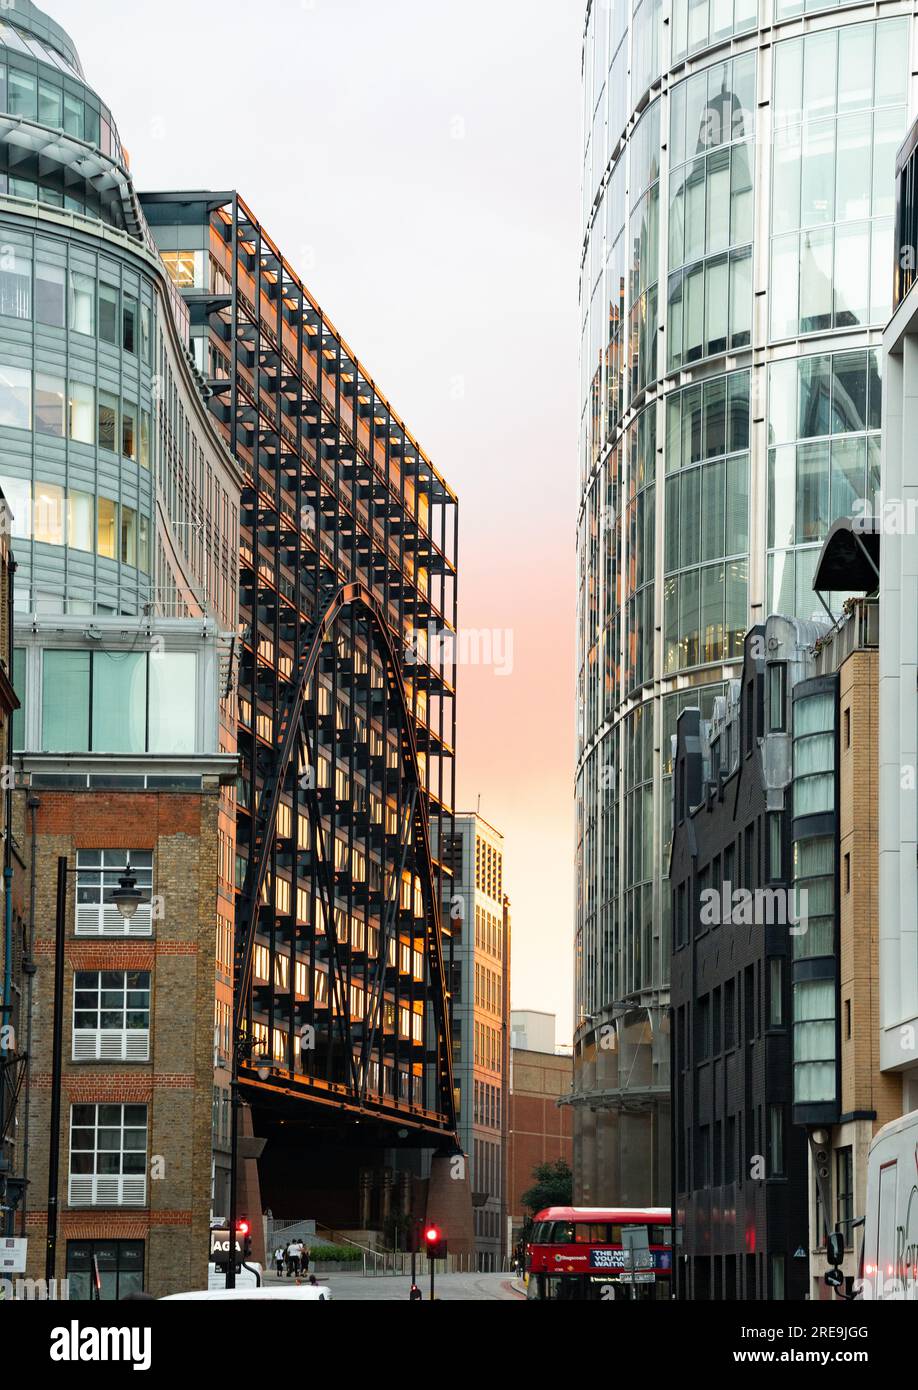 Sunset reflected on buildings in East London, England. Stock Photo